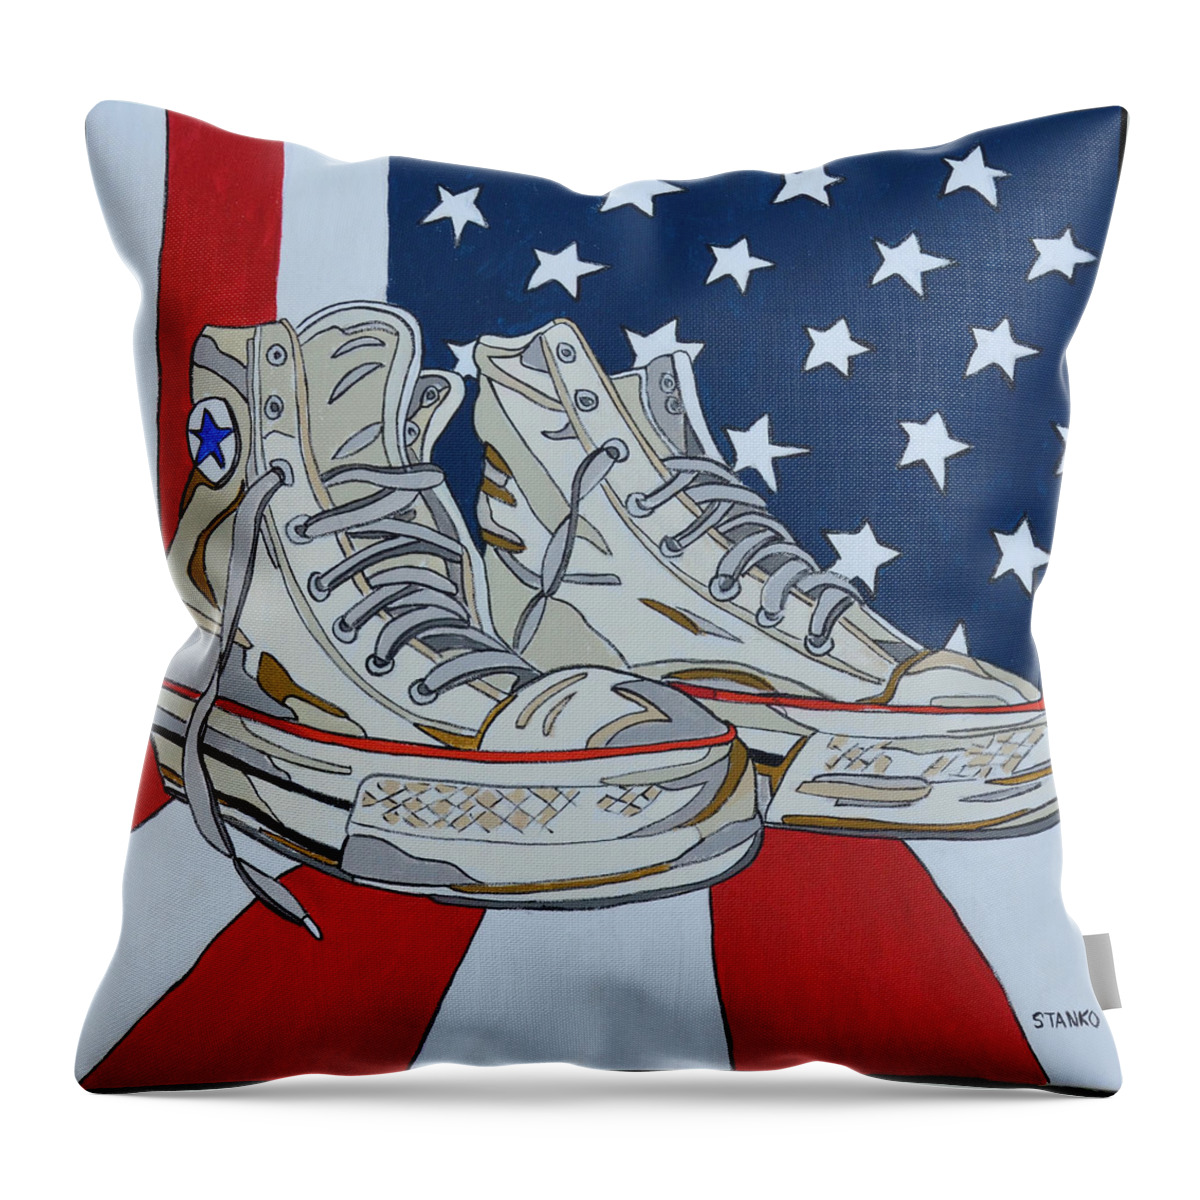  Stanko Paintings Throw Pillow featuring the painting Sneakers 9 by Mike Stanko